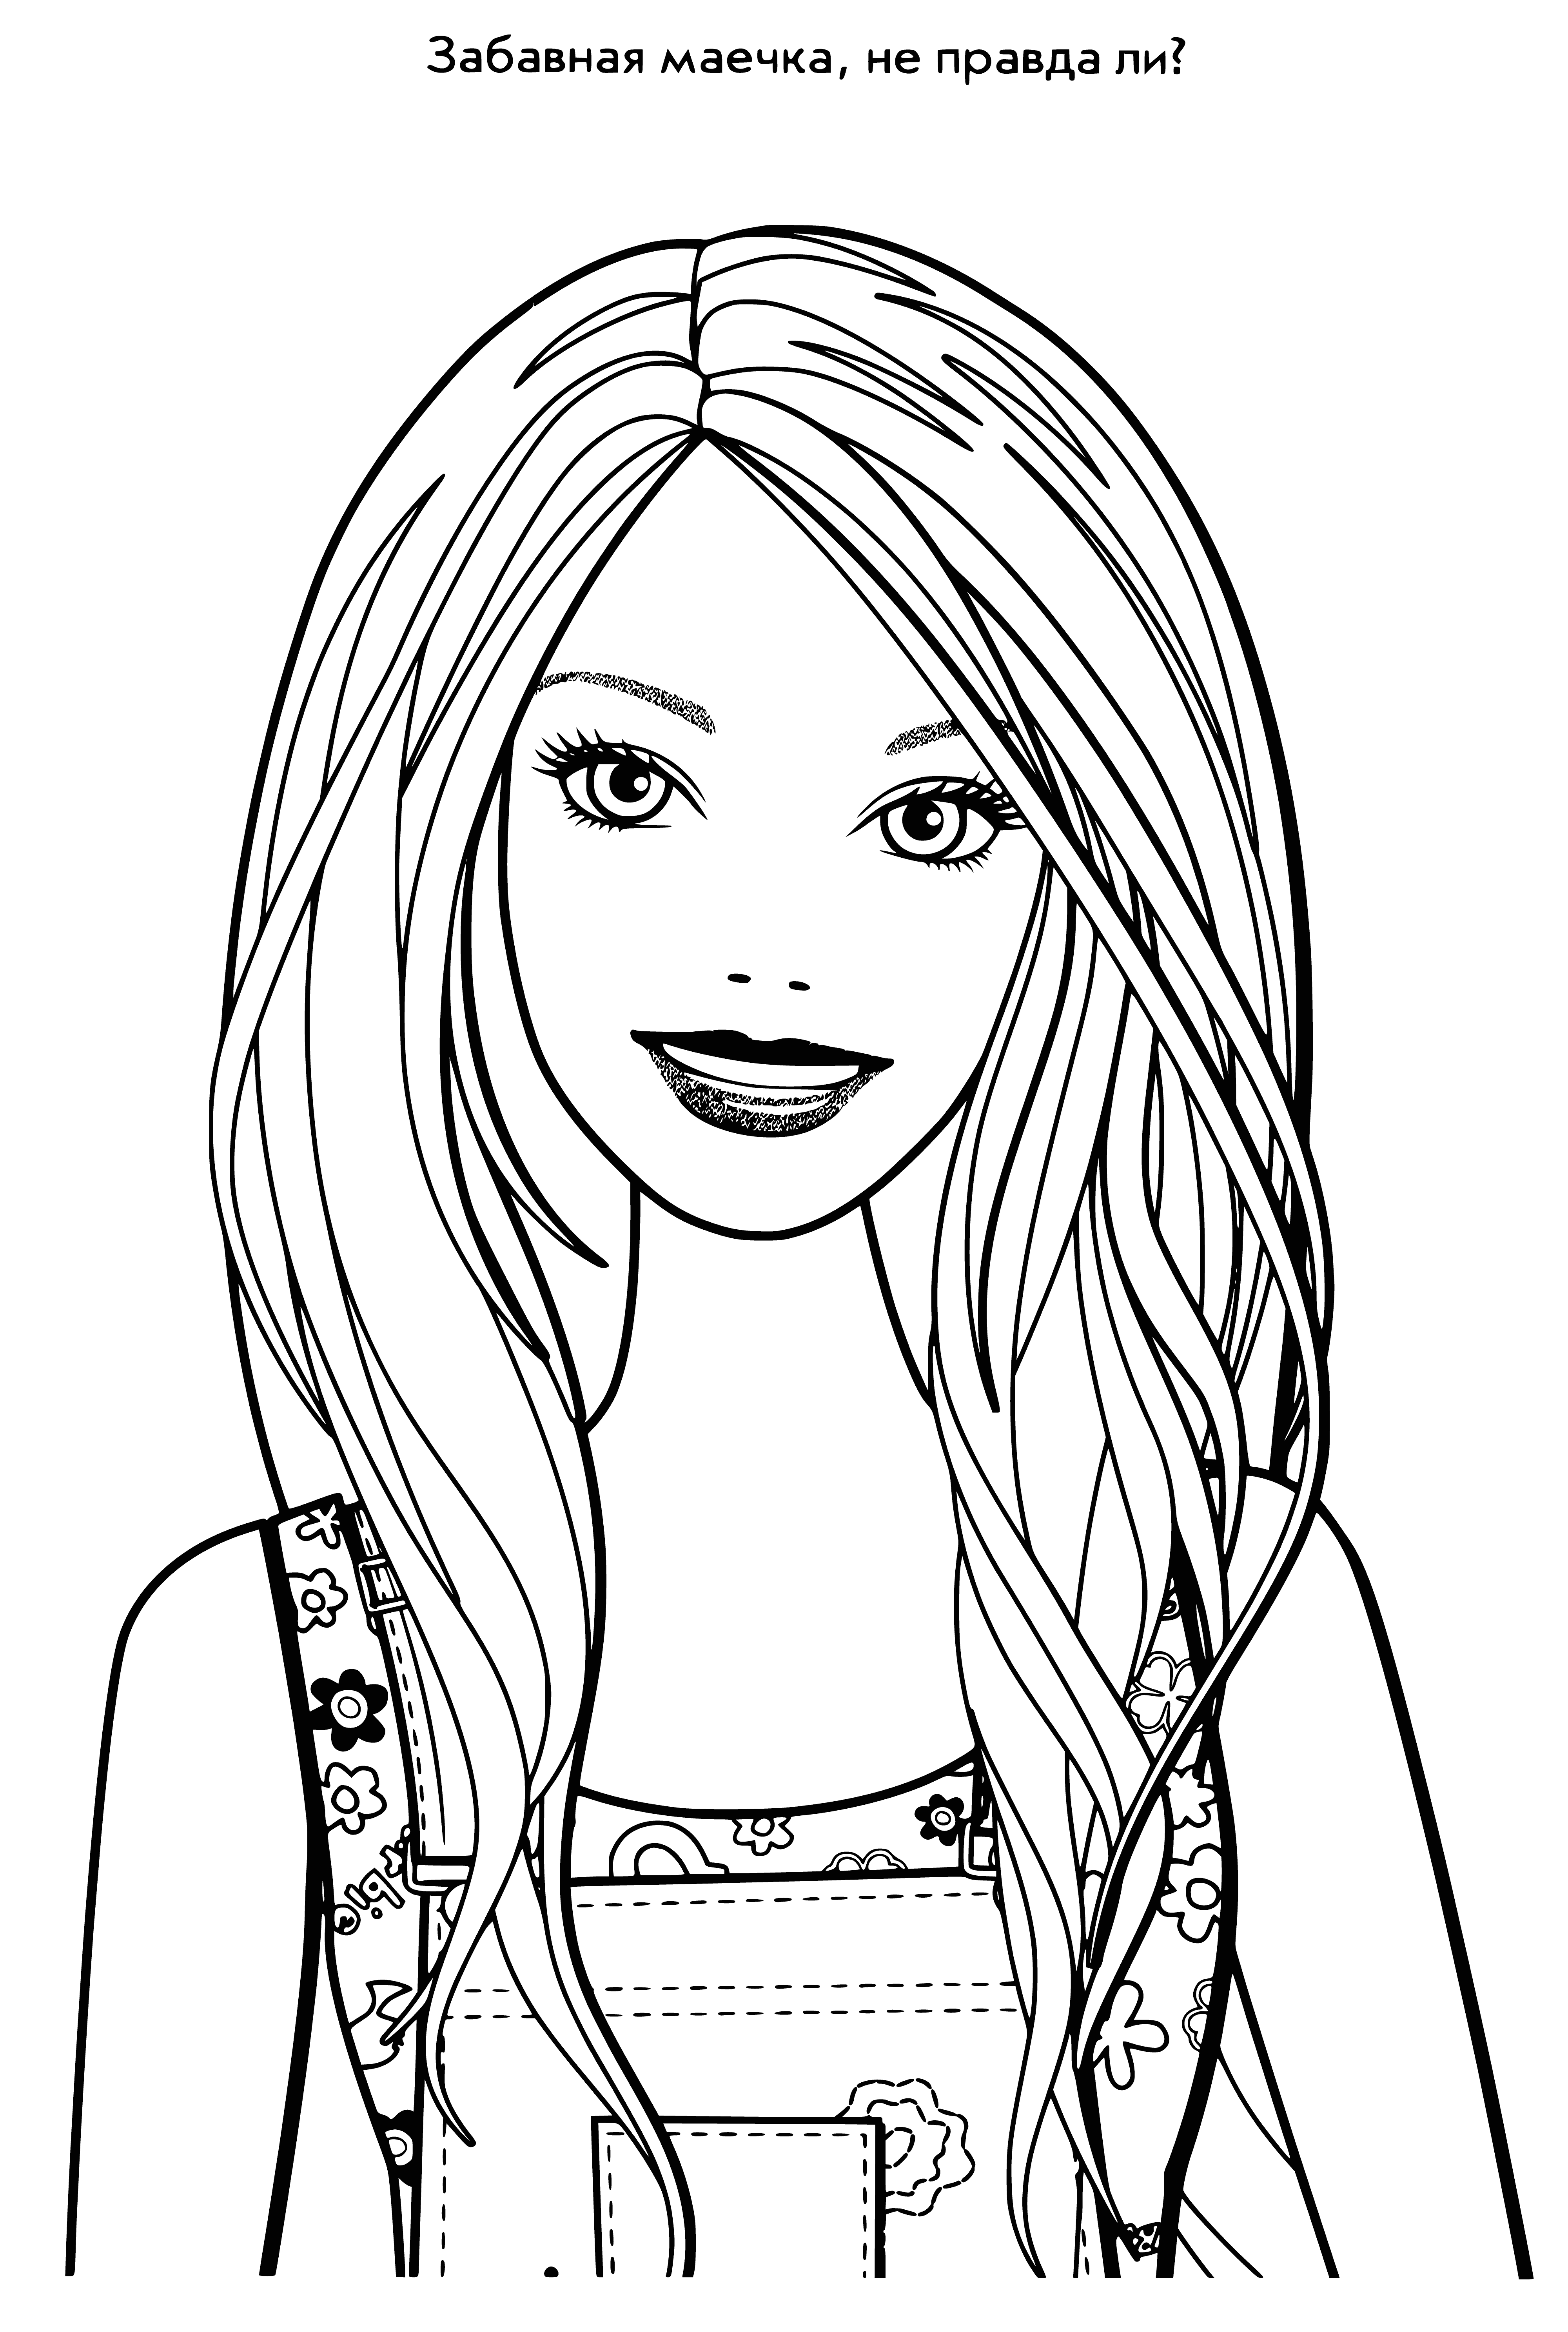 coloring page: A blonde woman wearing a pink dress holds a baby in a pink dress with a heart necklace.